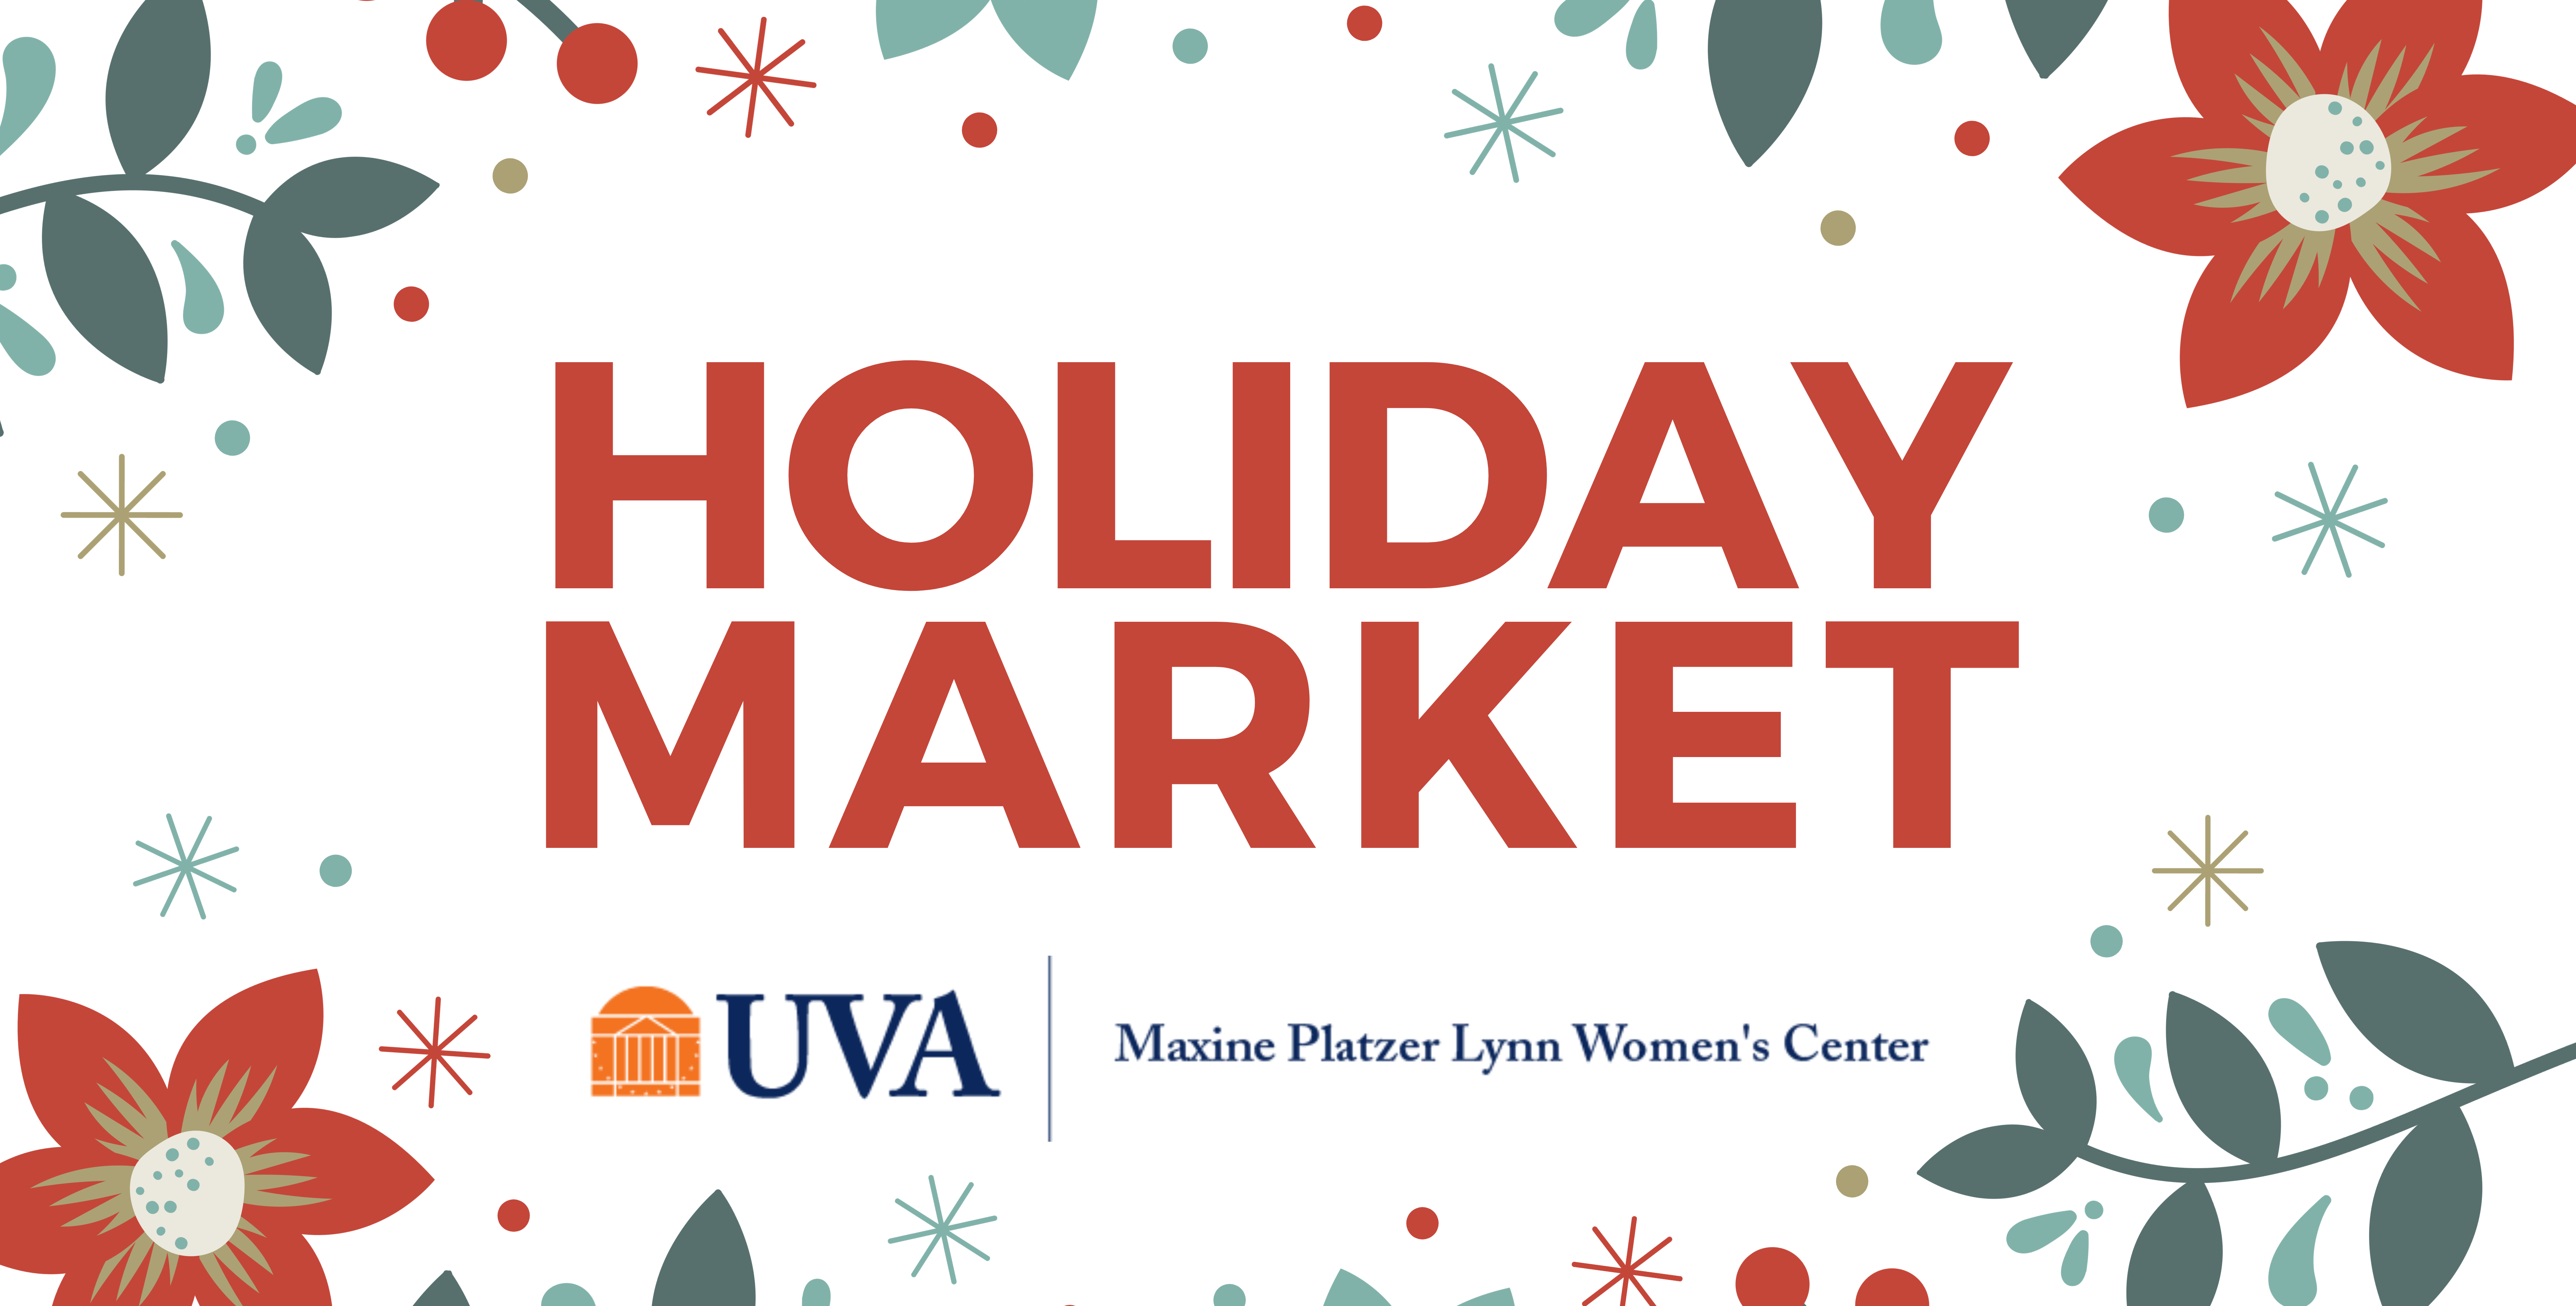 White rectangle with red flowers and green leaves along border. Reads "holiday market" in large red text in the center. underneath red text is logo which depicts orange rotunda and blue text reading "UVA Maxine Platzer Lynn Women's Center".